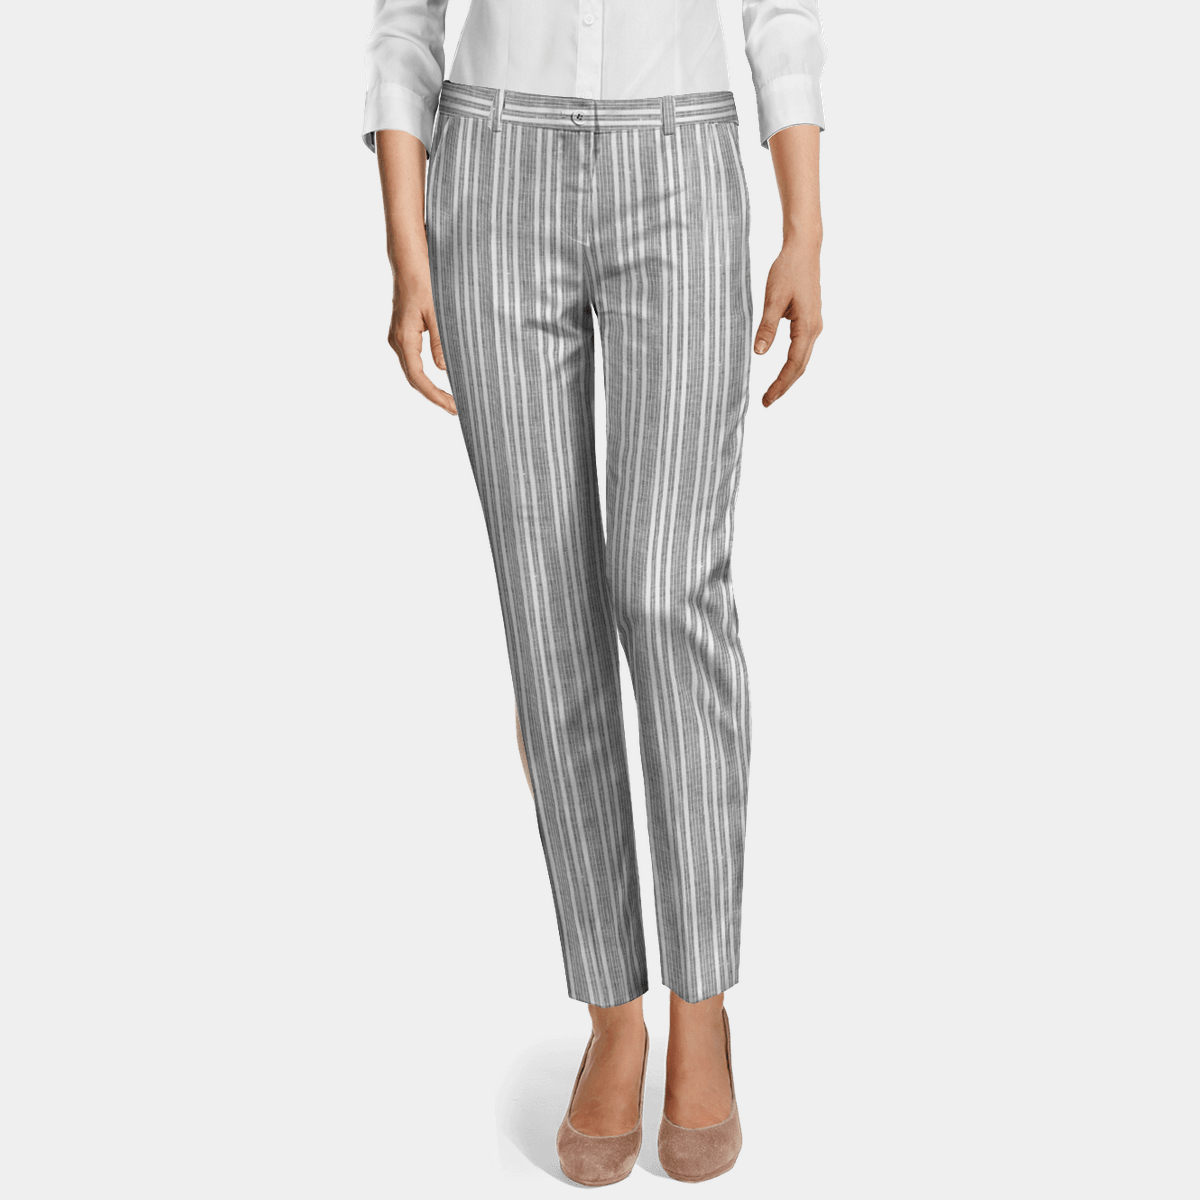 Light Grey striped Linen pleated Cigarette Pants $89 | Sumissura